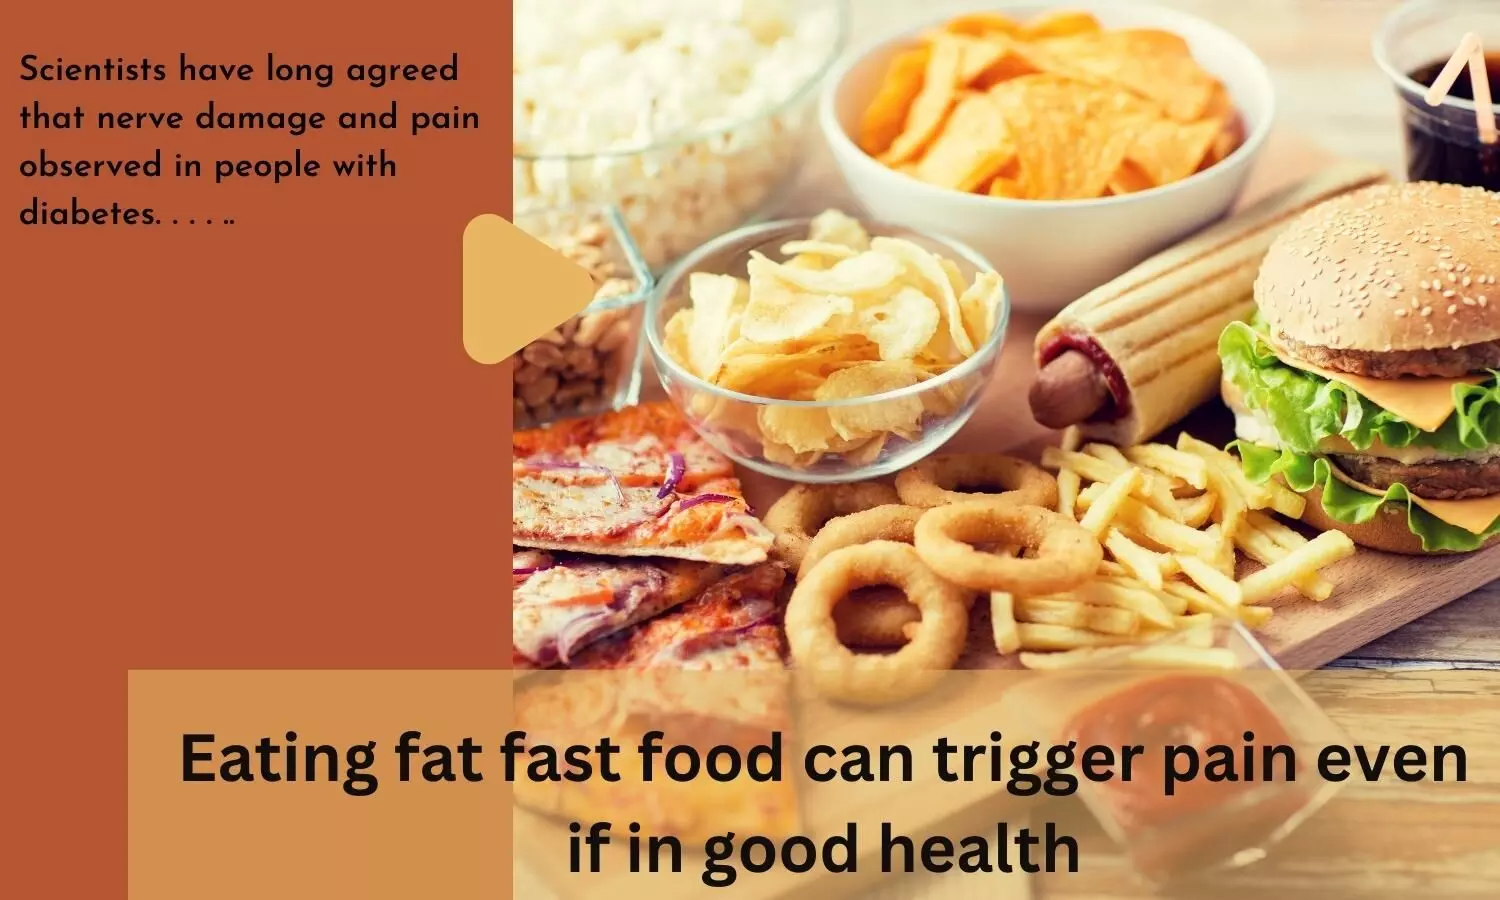 Eating fat fast food can trigger pain even if in good health